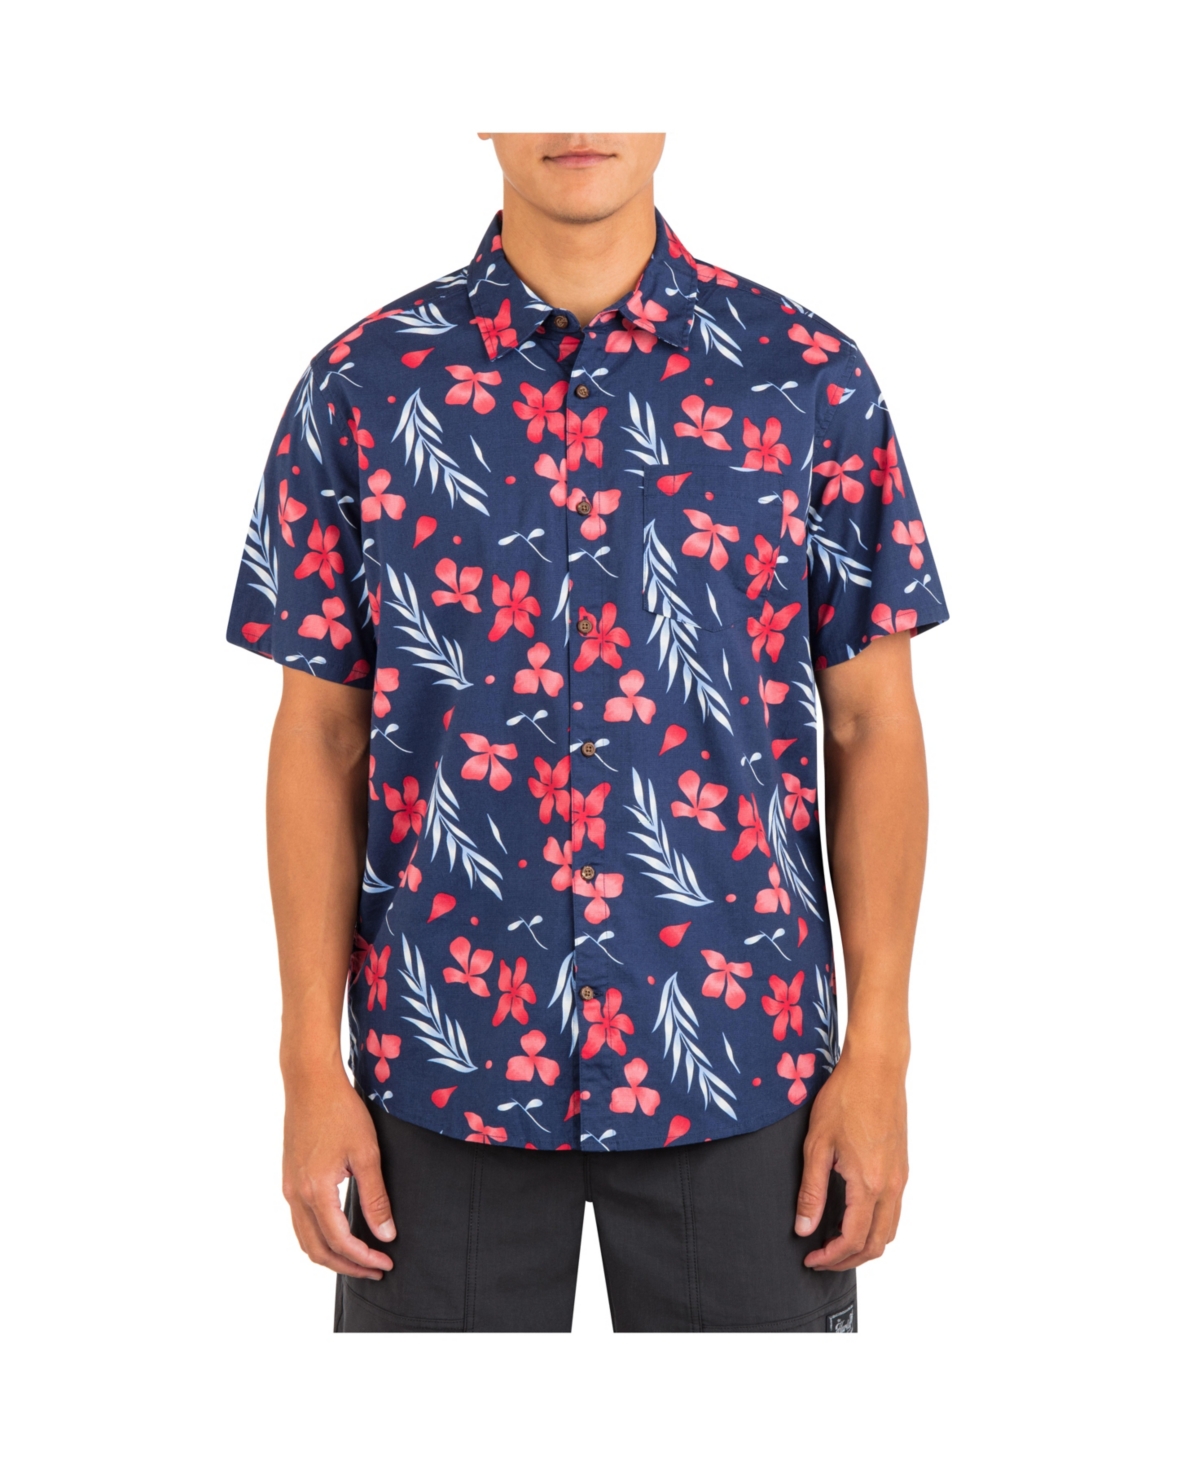 HURLEY MEN'S ONE AND ONLY LIDO STRETCH SHORT SLEEVE SHIRT